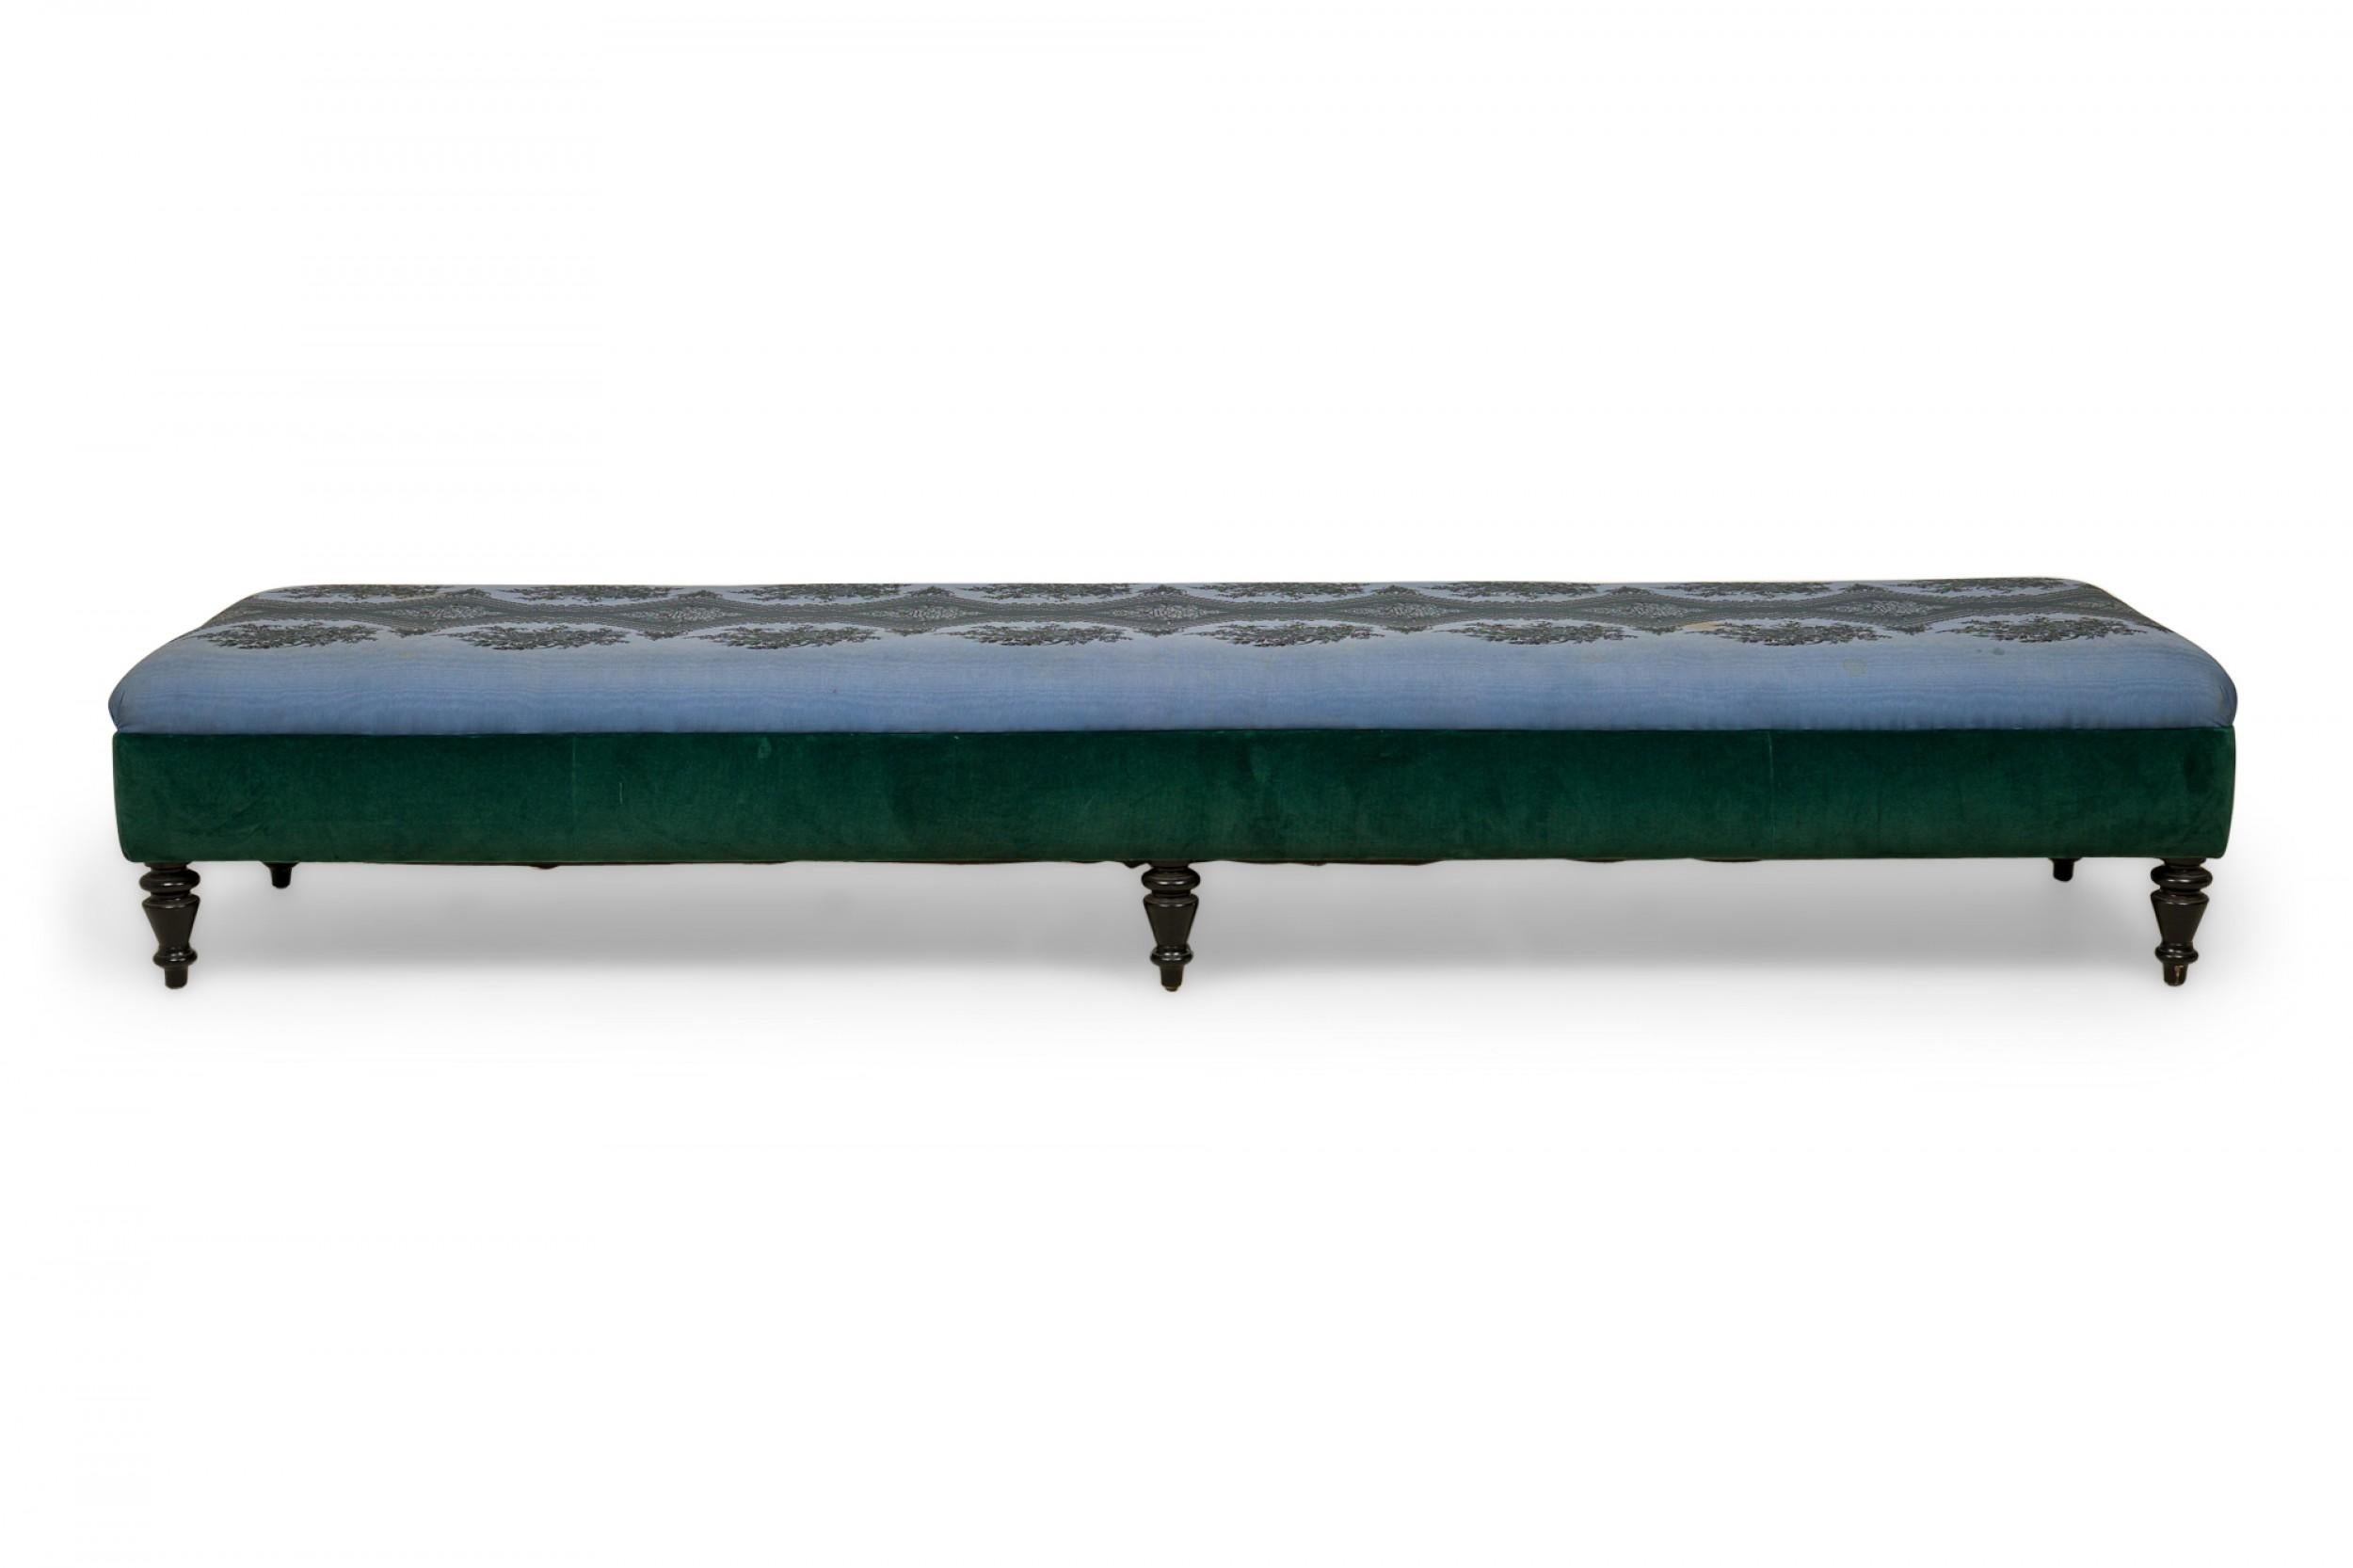 French Victorian-style long bench with a blue and green floral patterned upholstered seat with green border, resting on six black painted turned short legs.